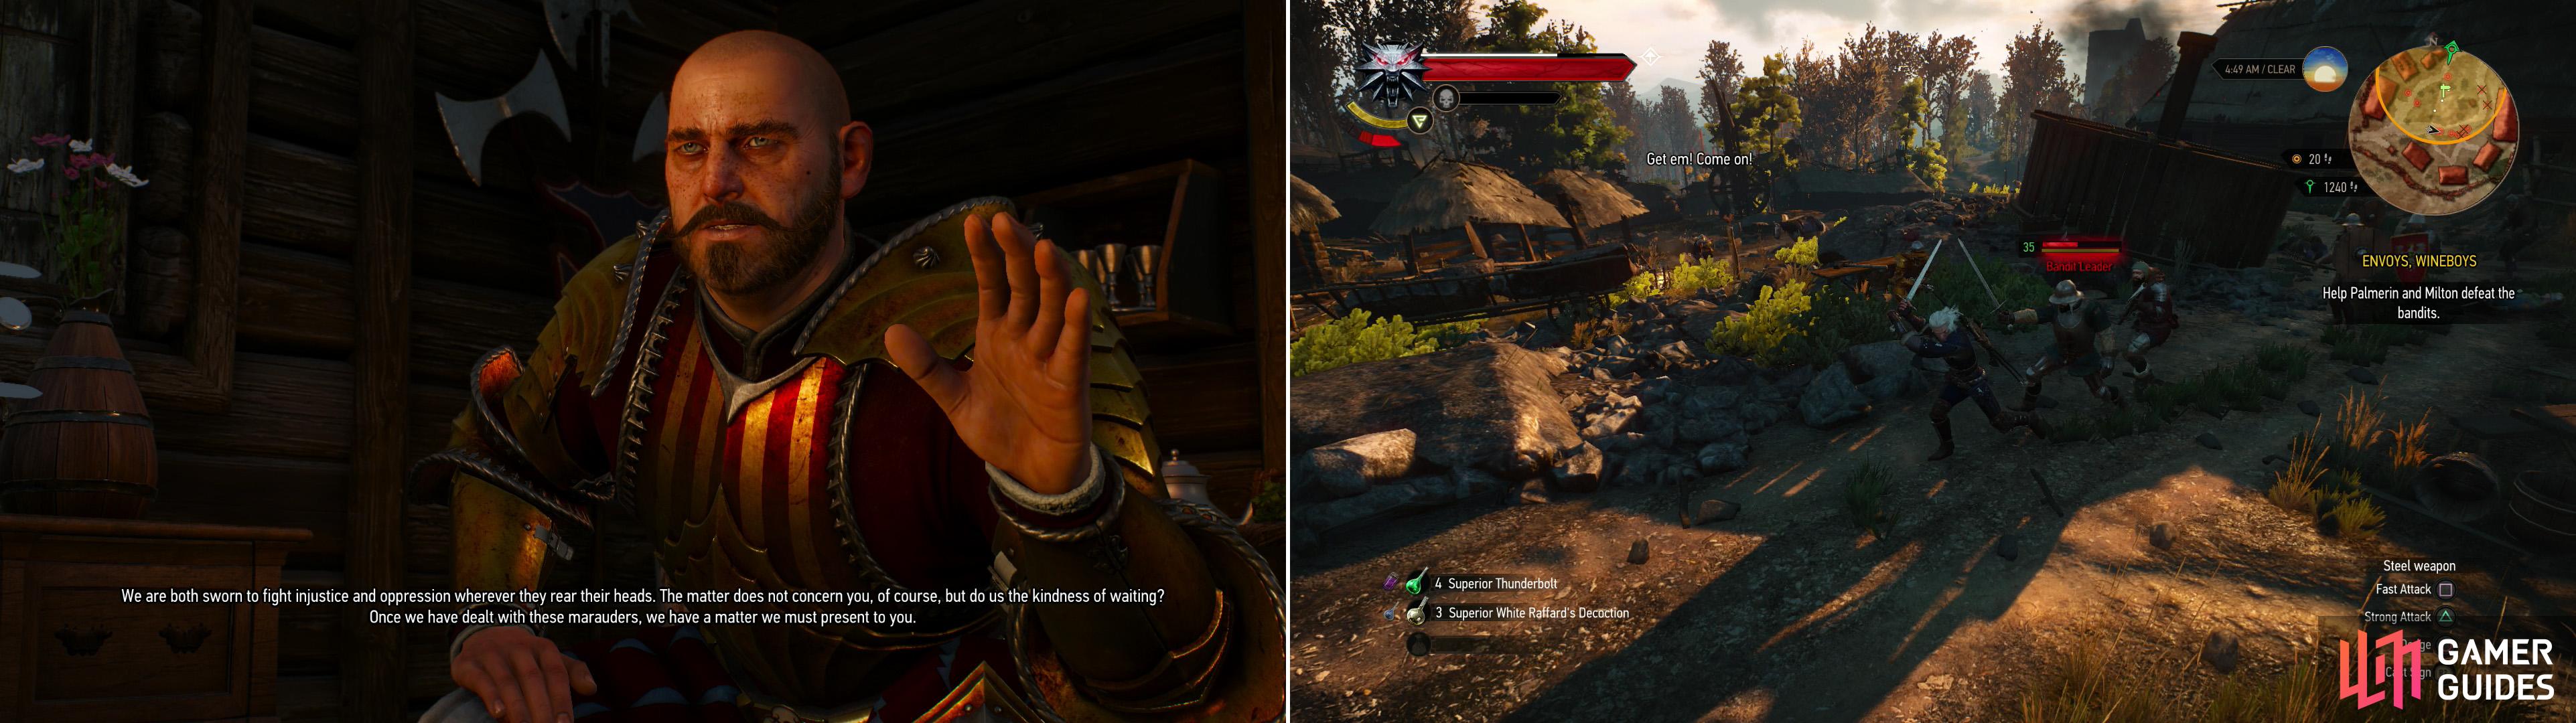 In the village of Stonecutter’s Settlement you’ll find two knights from Toussaint (left), who have a bit of business for you after they deal with some bandits (right).